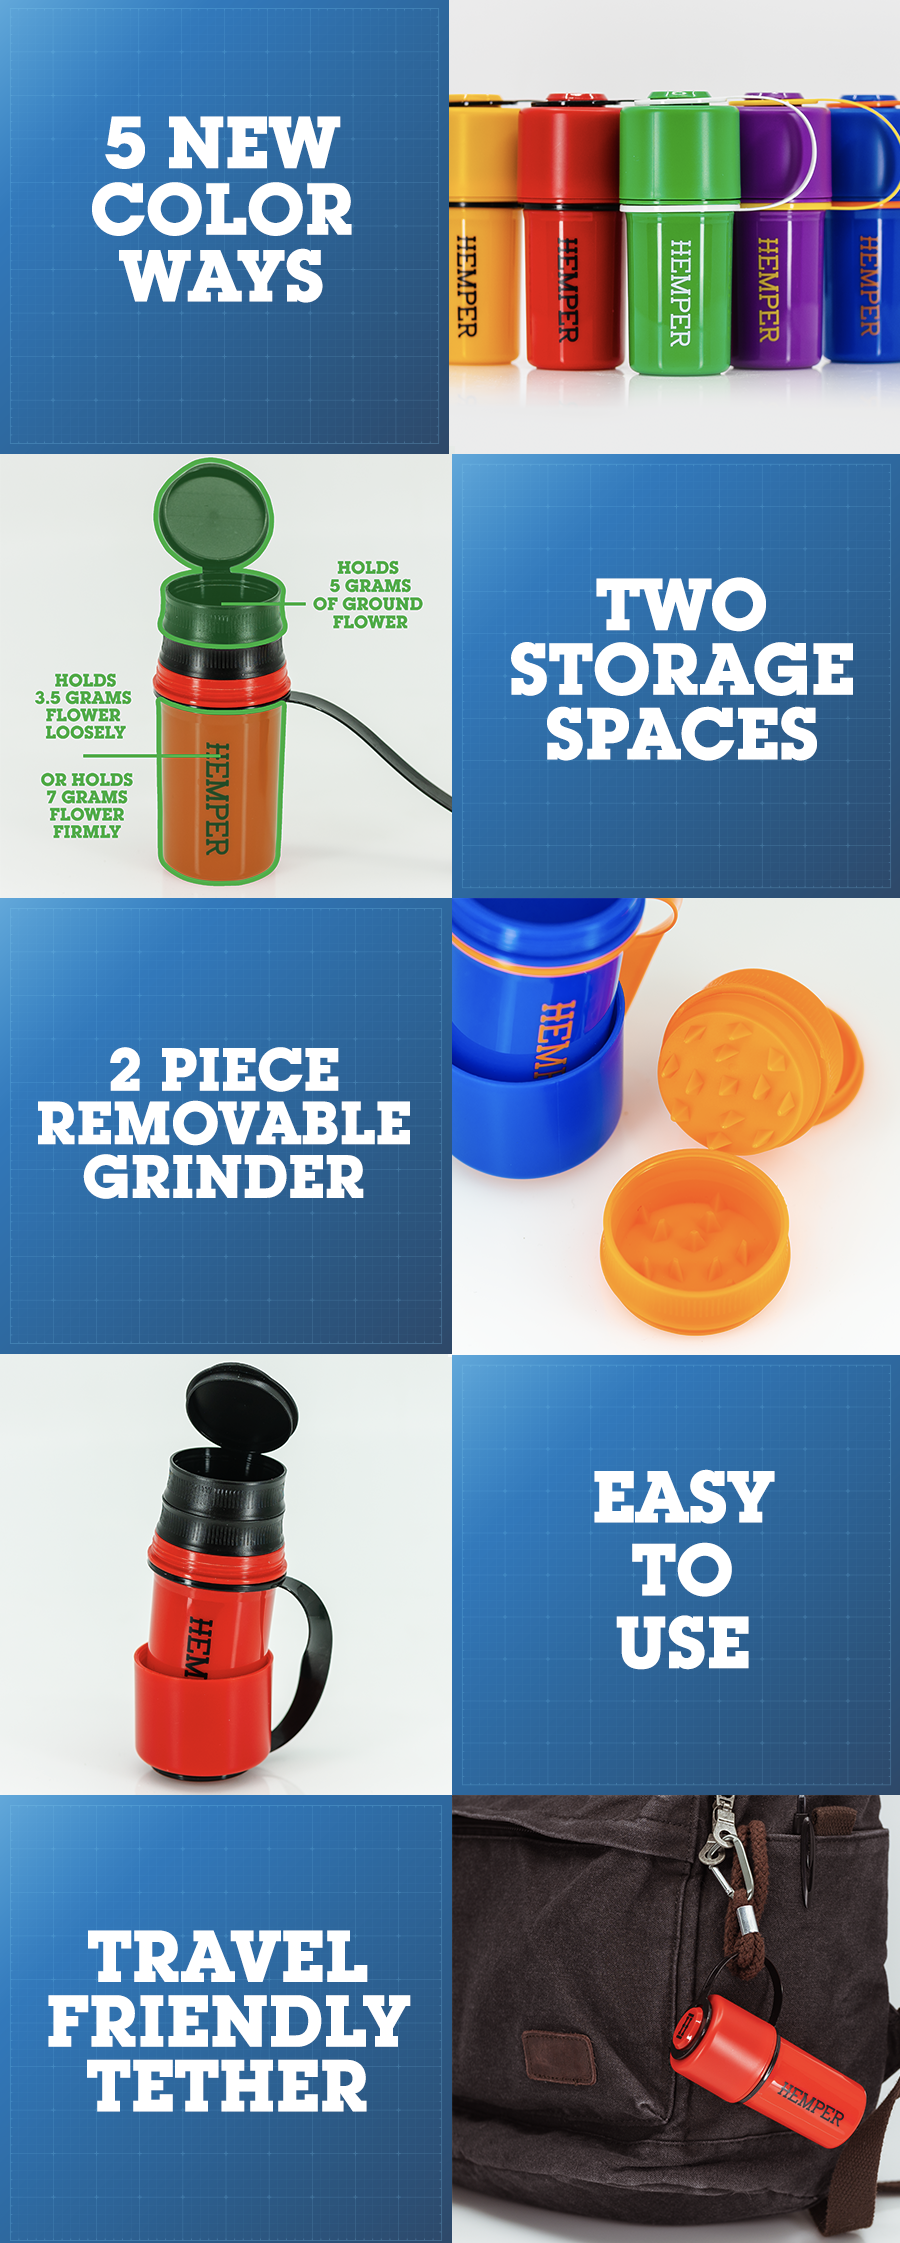 The Keeper by Hemper 3-Part Grinders in various colors with dual storage and travel tether